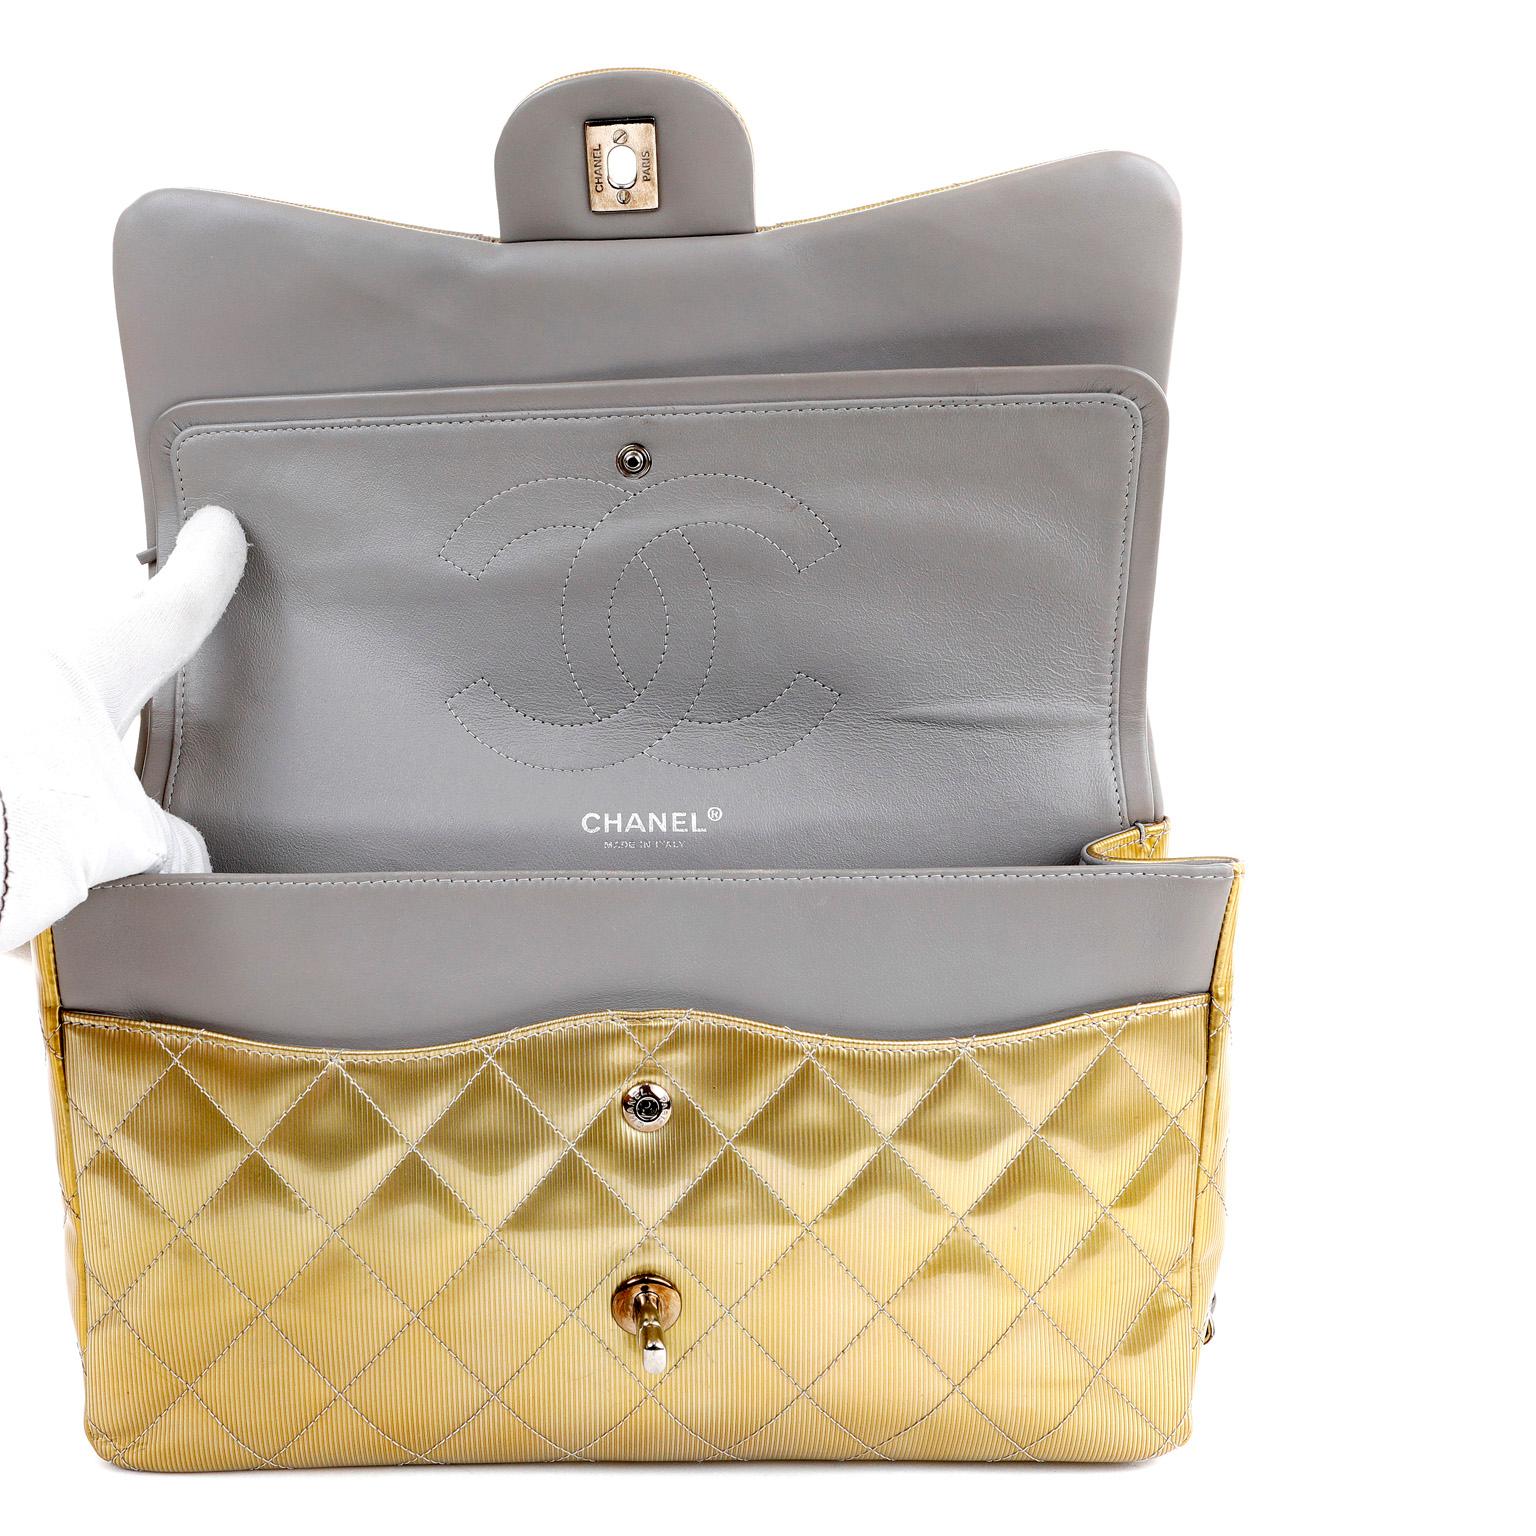 Chanel Gold Patent Leather Jumbo Classic Flap Bag In Excellent Condition For Sale In Palm Beach, FL